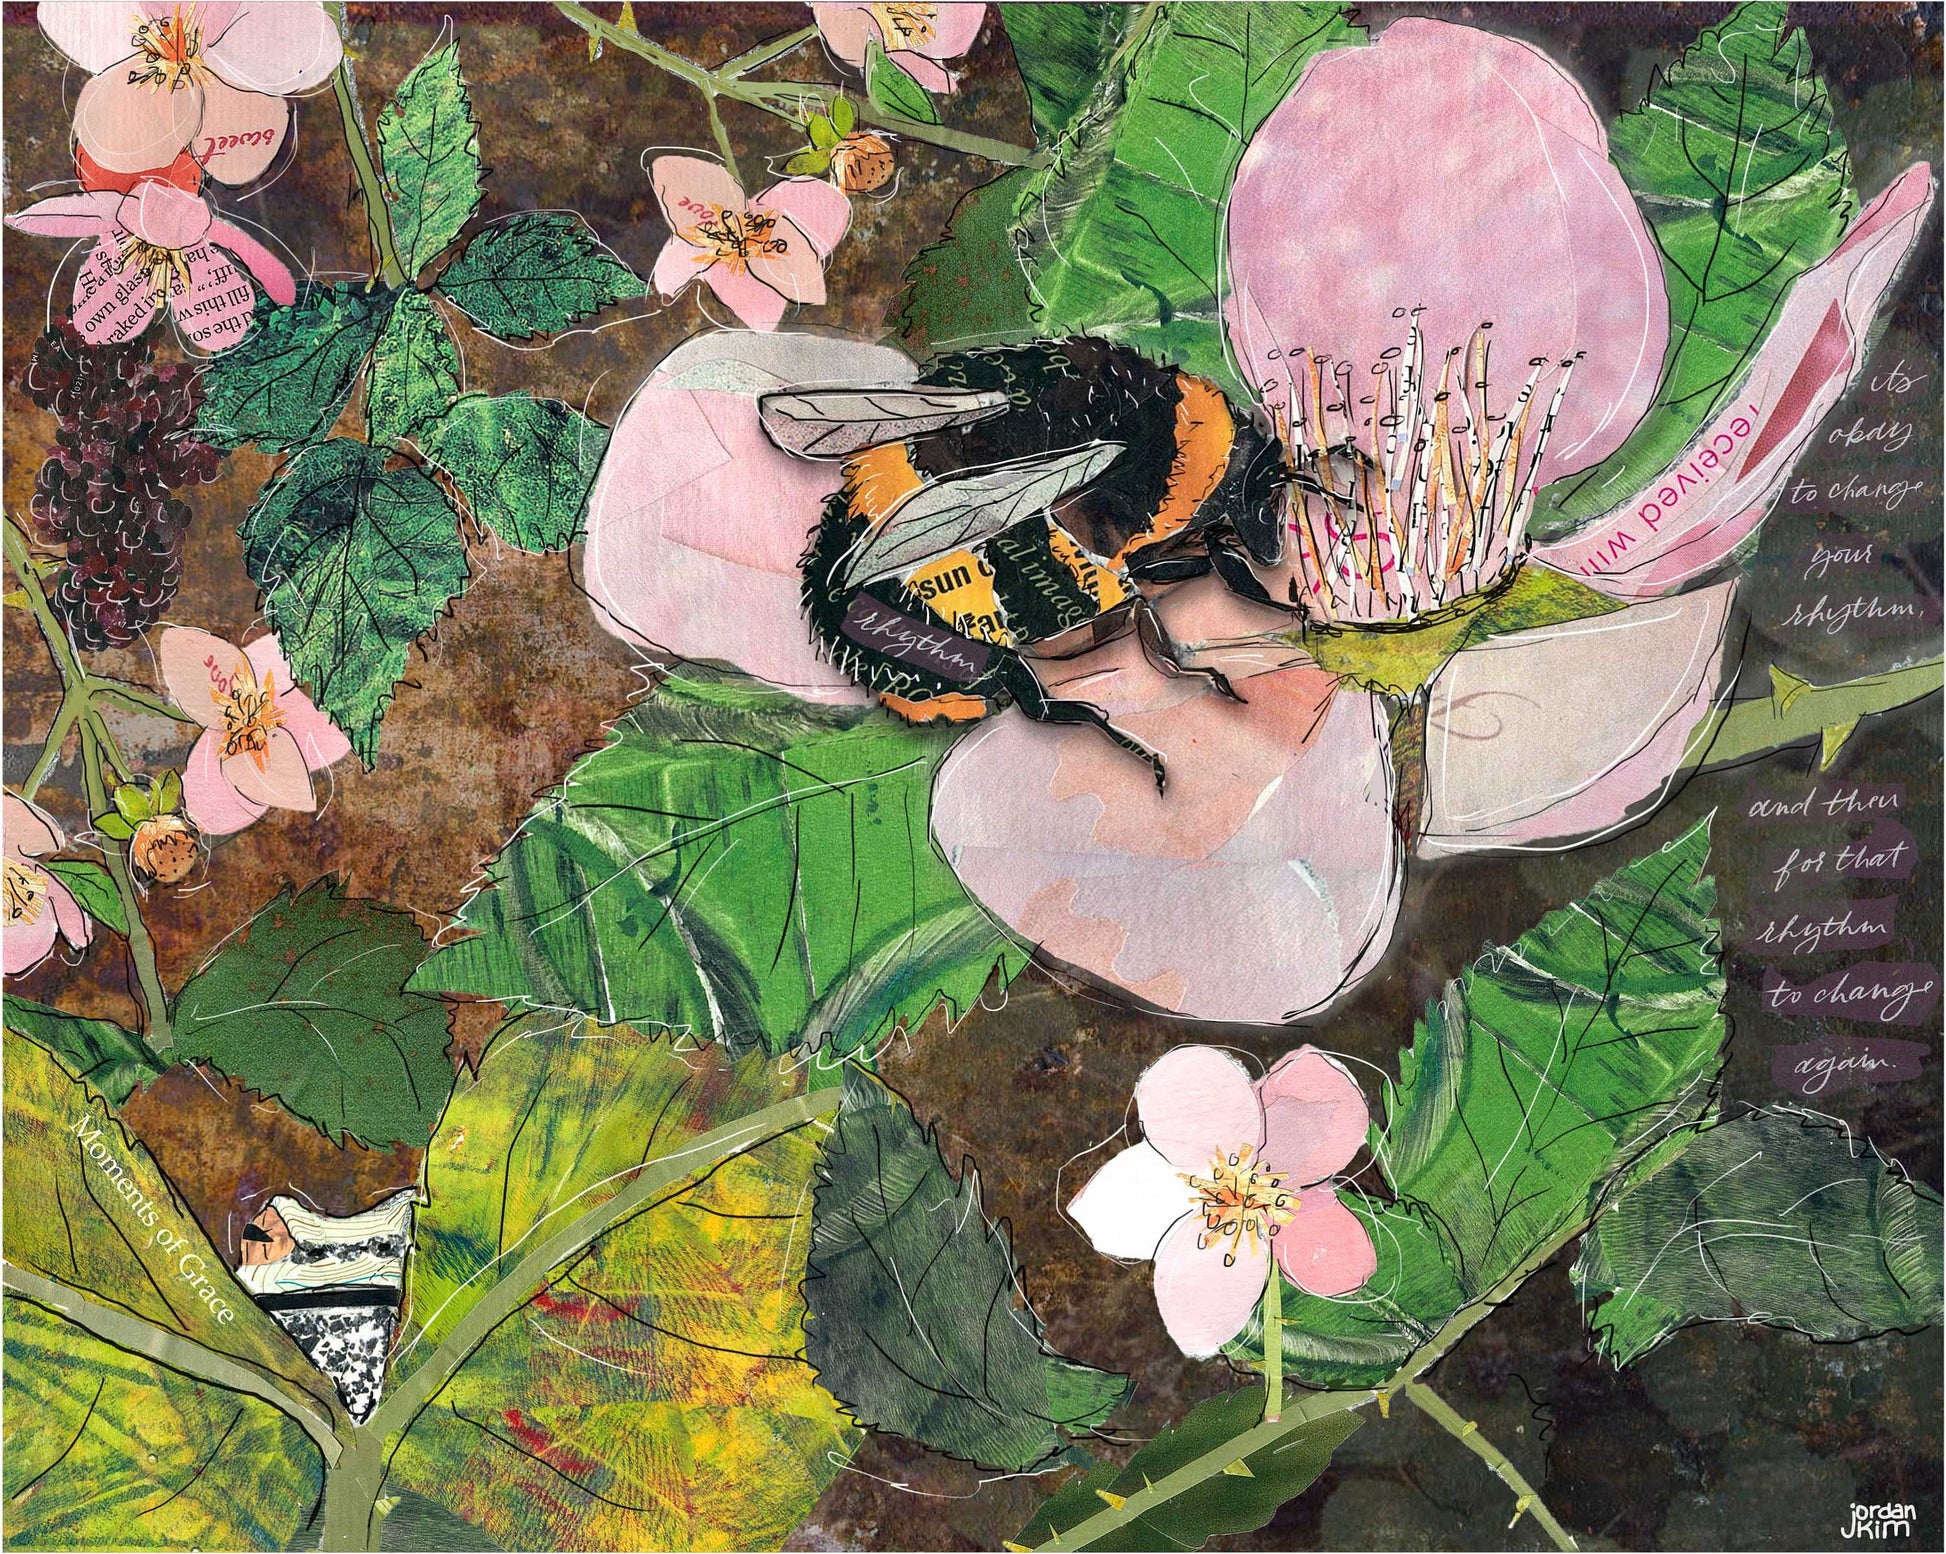 Greeting Card of a mixed media collage of bumble bee pollenating blackberry flowers, frog hiding among leaves - blank inside